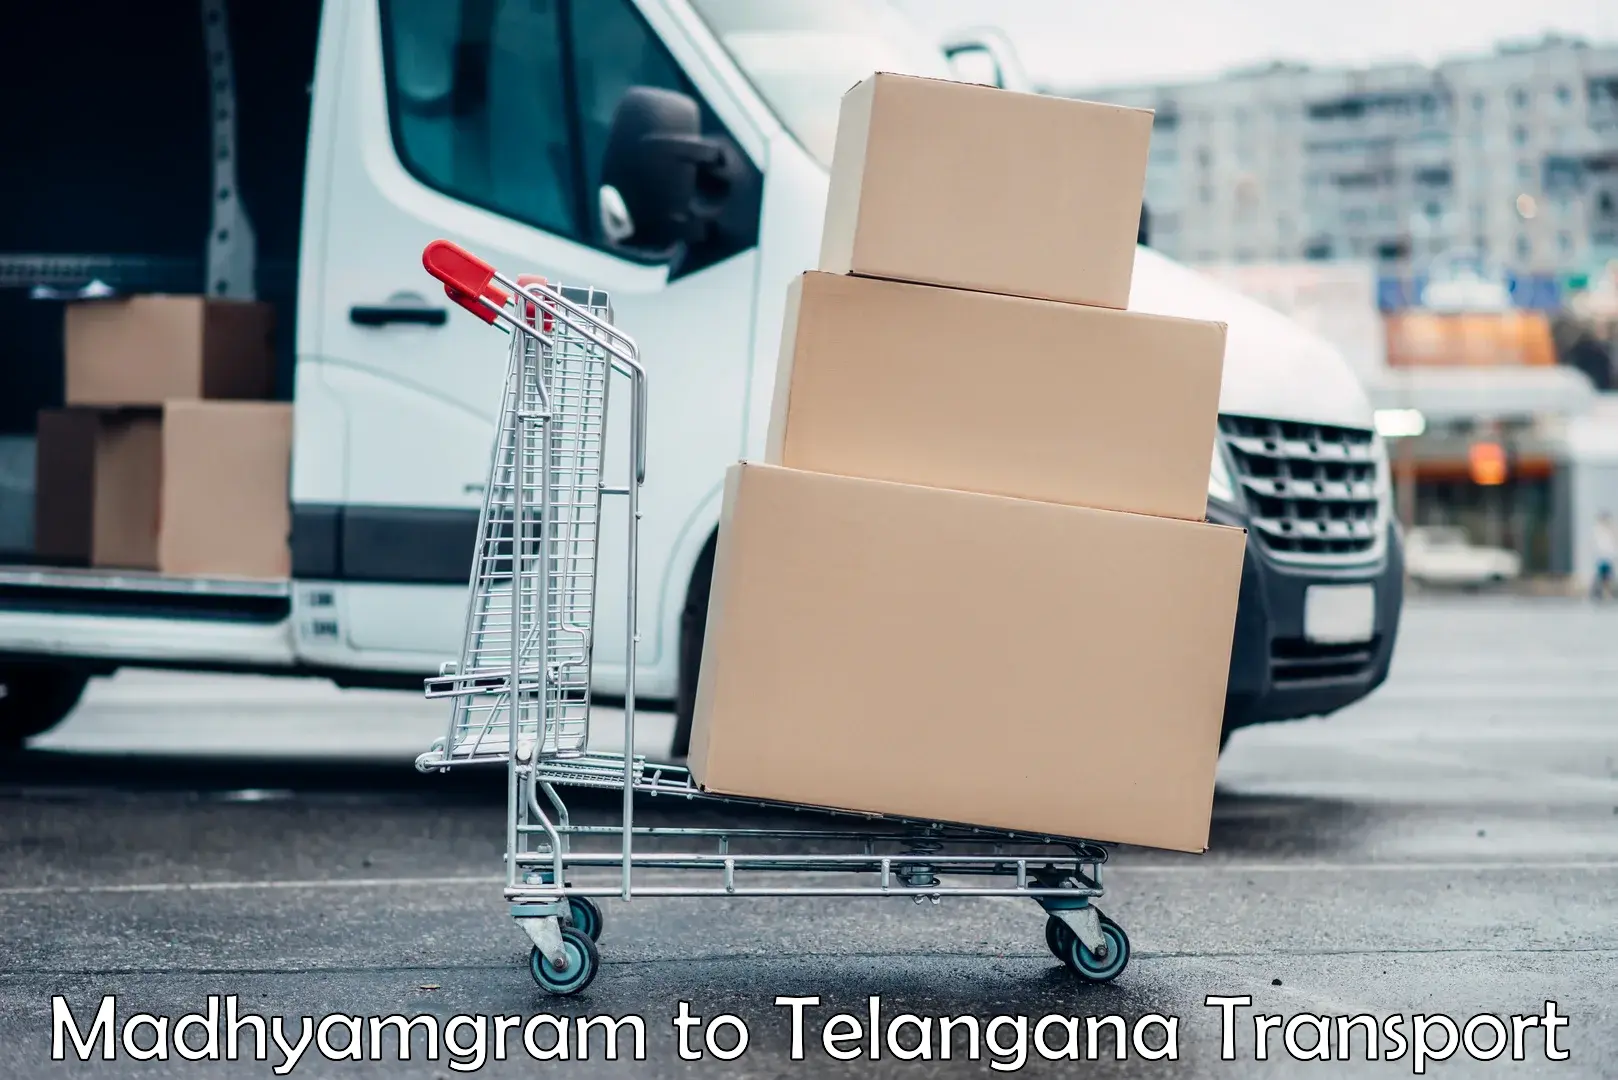 Express transport services in Madhyamgram to Ibrahimpatnam